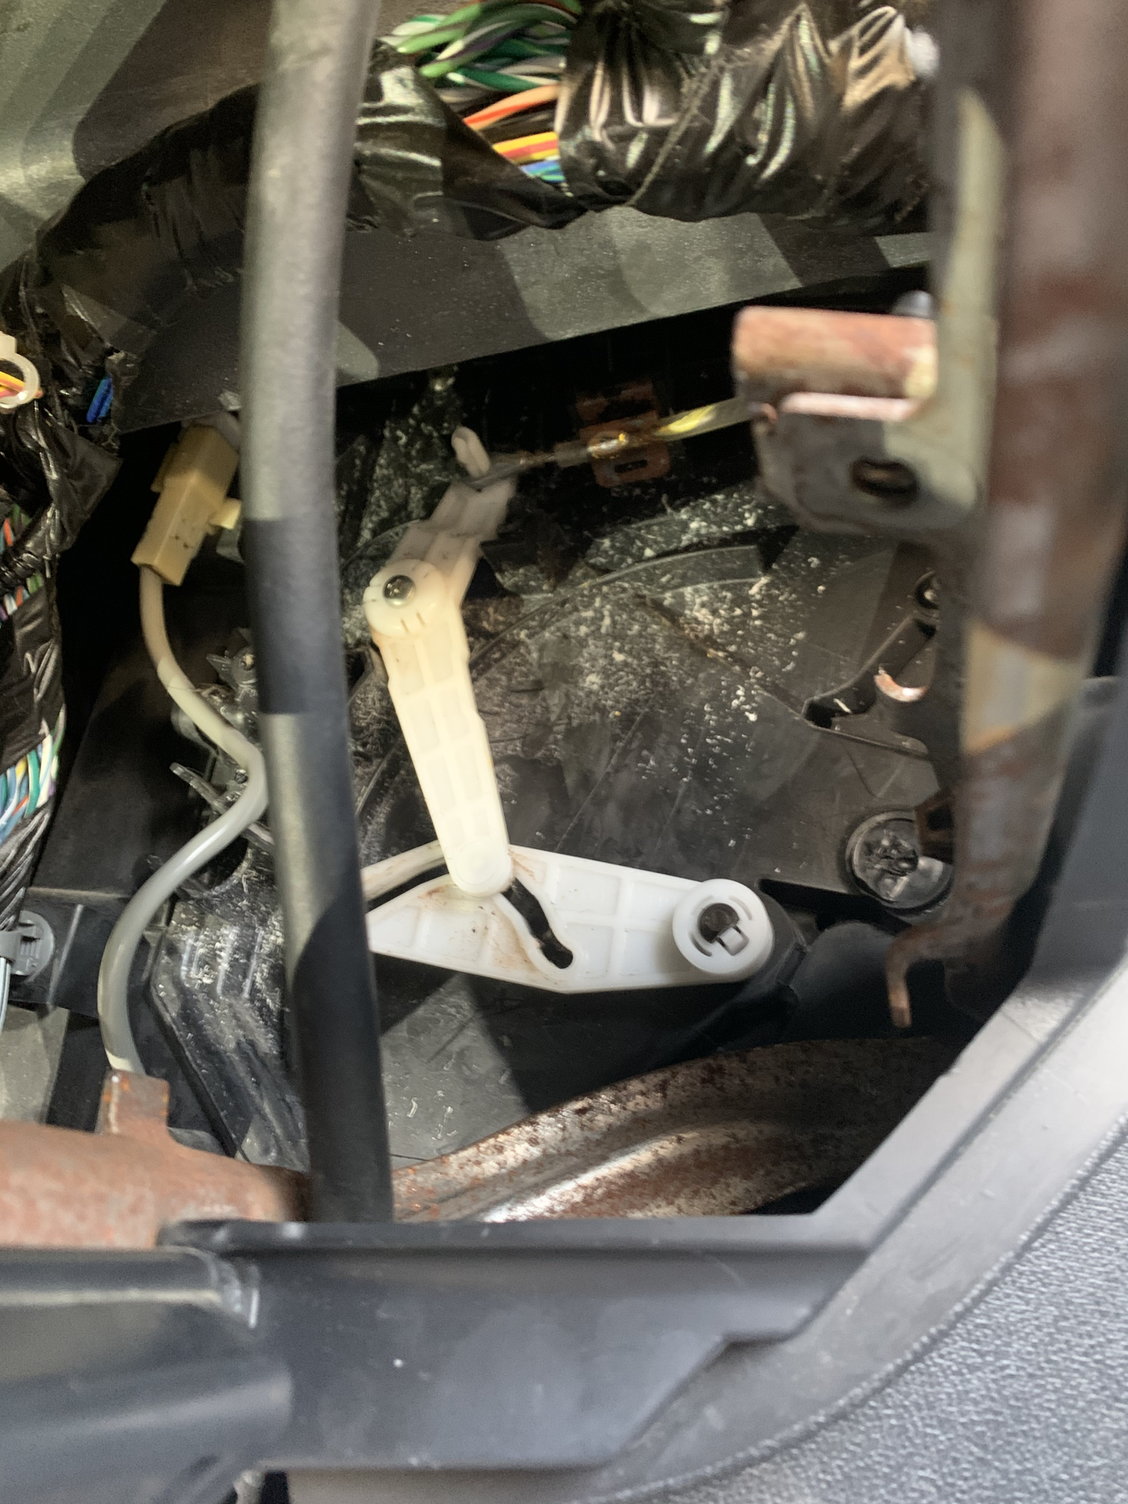 09 Unlimited Rubicon Blend Door Actuator  - The top  destination for Jeep JK and JL Wrangler news, rumors, and discussion